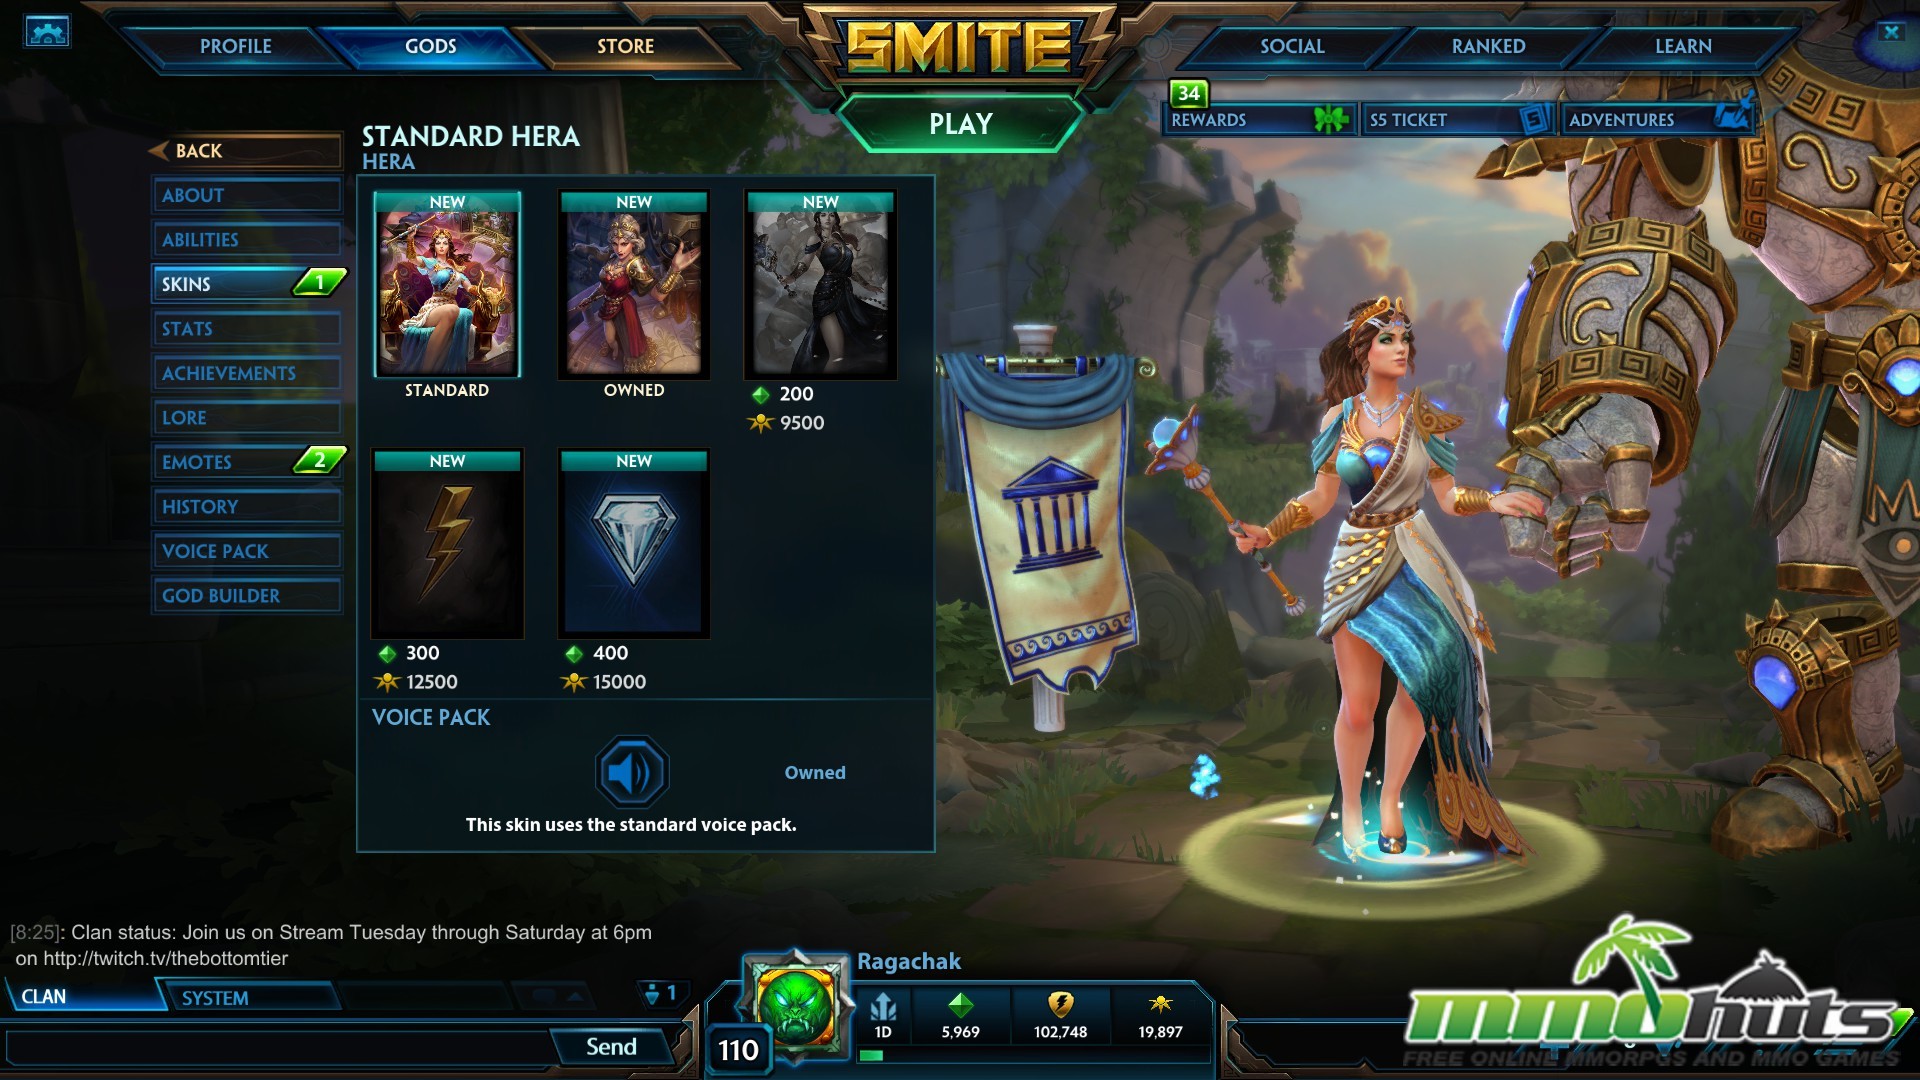 how to update smite faster